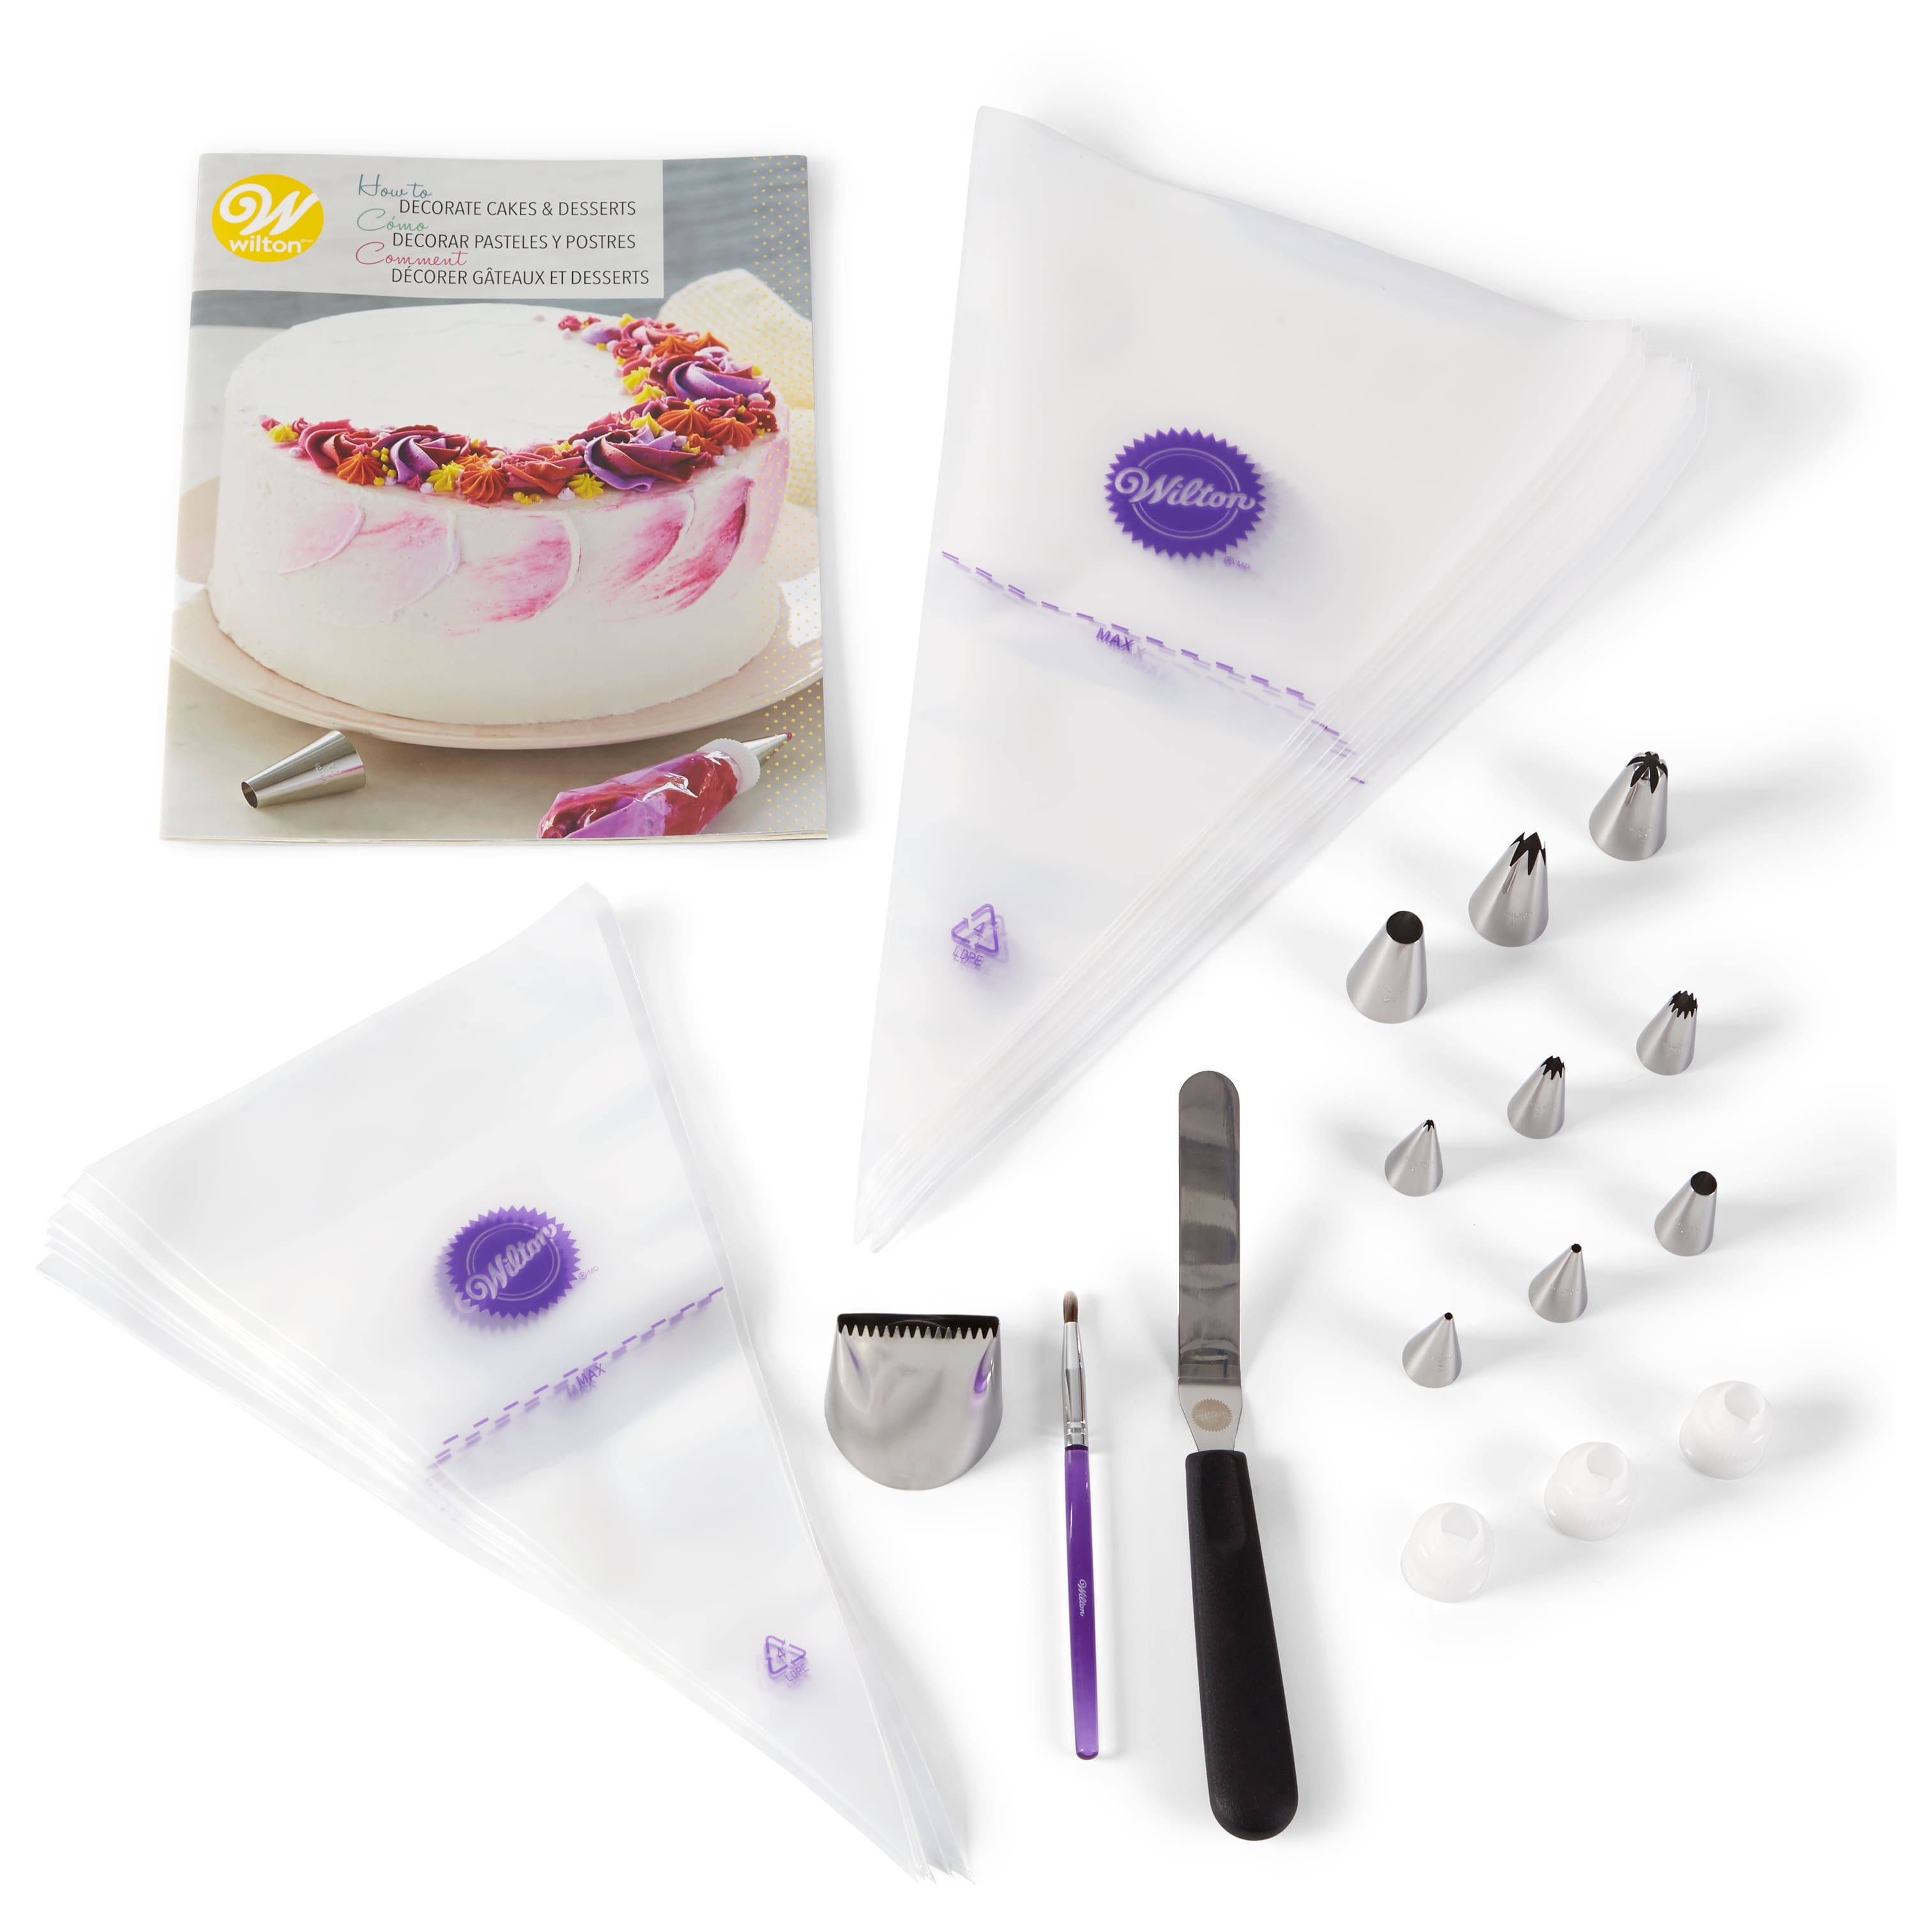 Buy The Wilton How To Decorate Cakes & Desserts Kit At